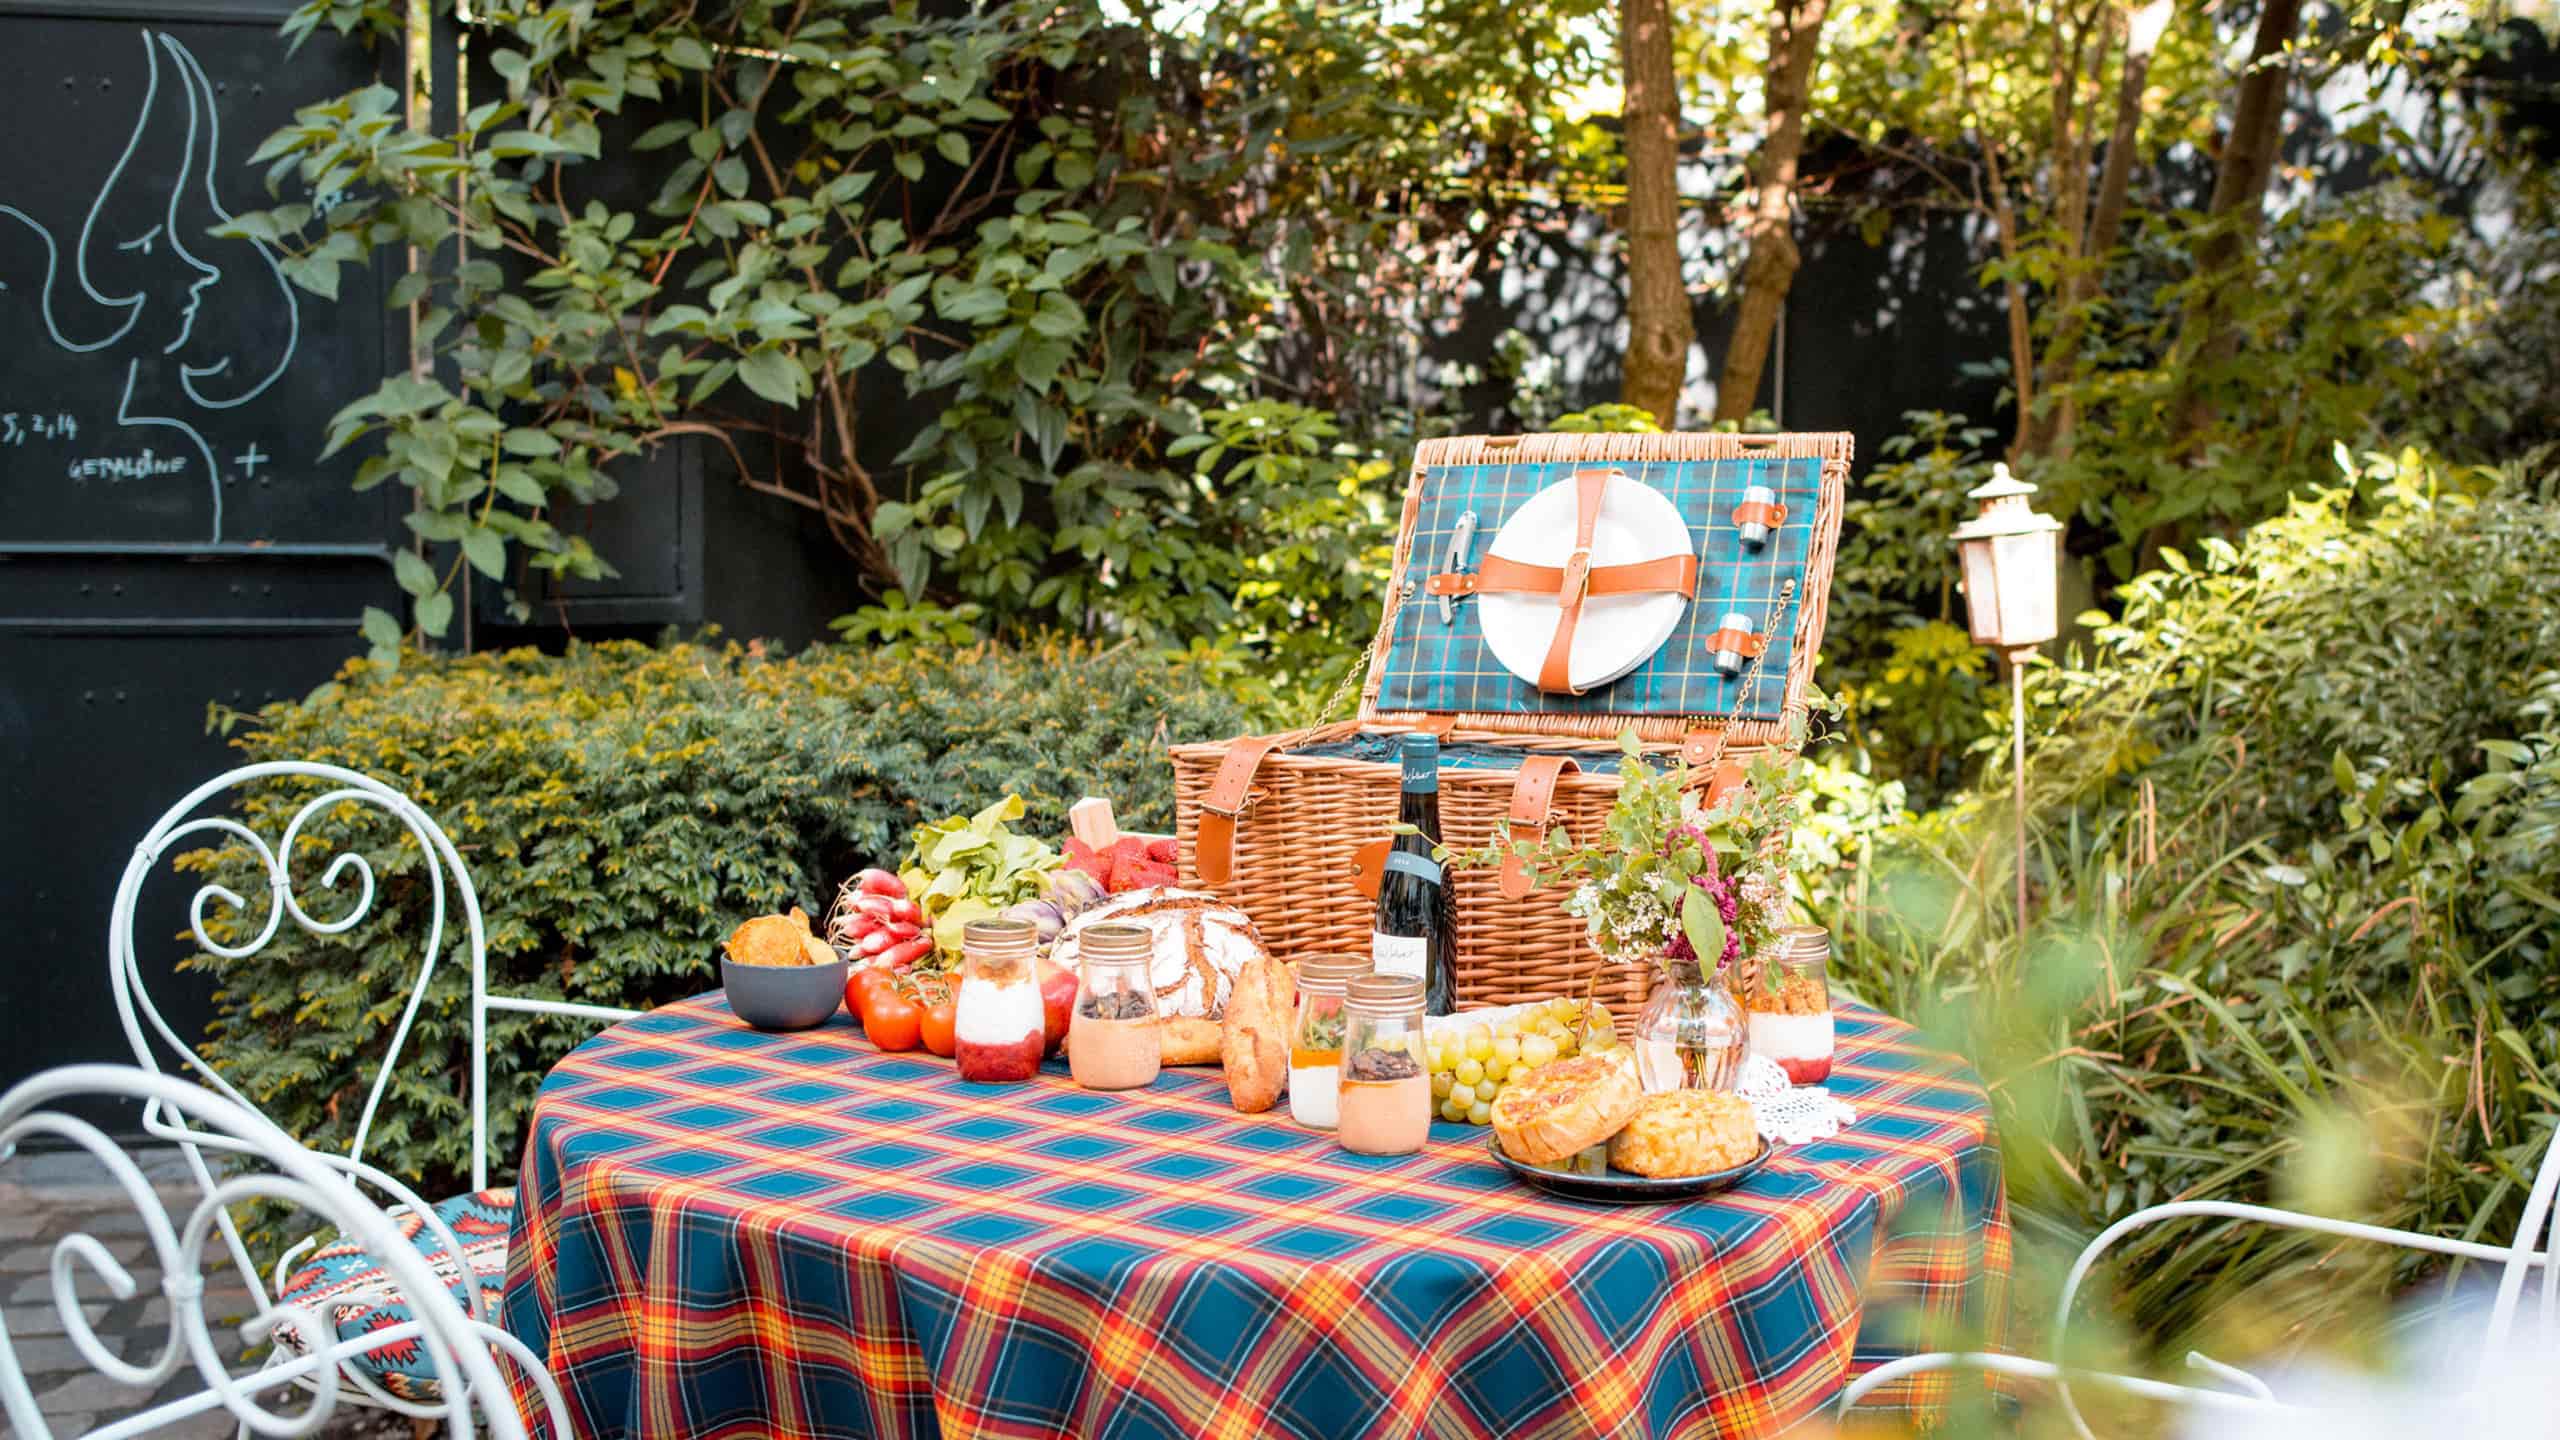 Leather picnic baskets